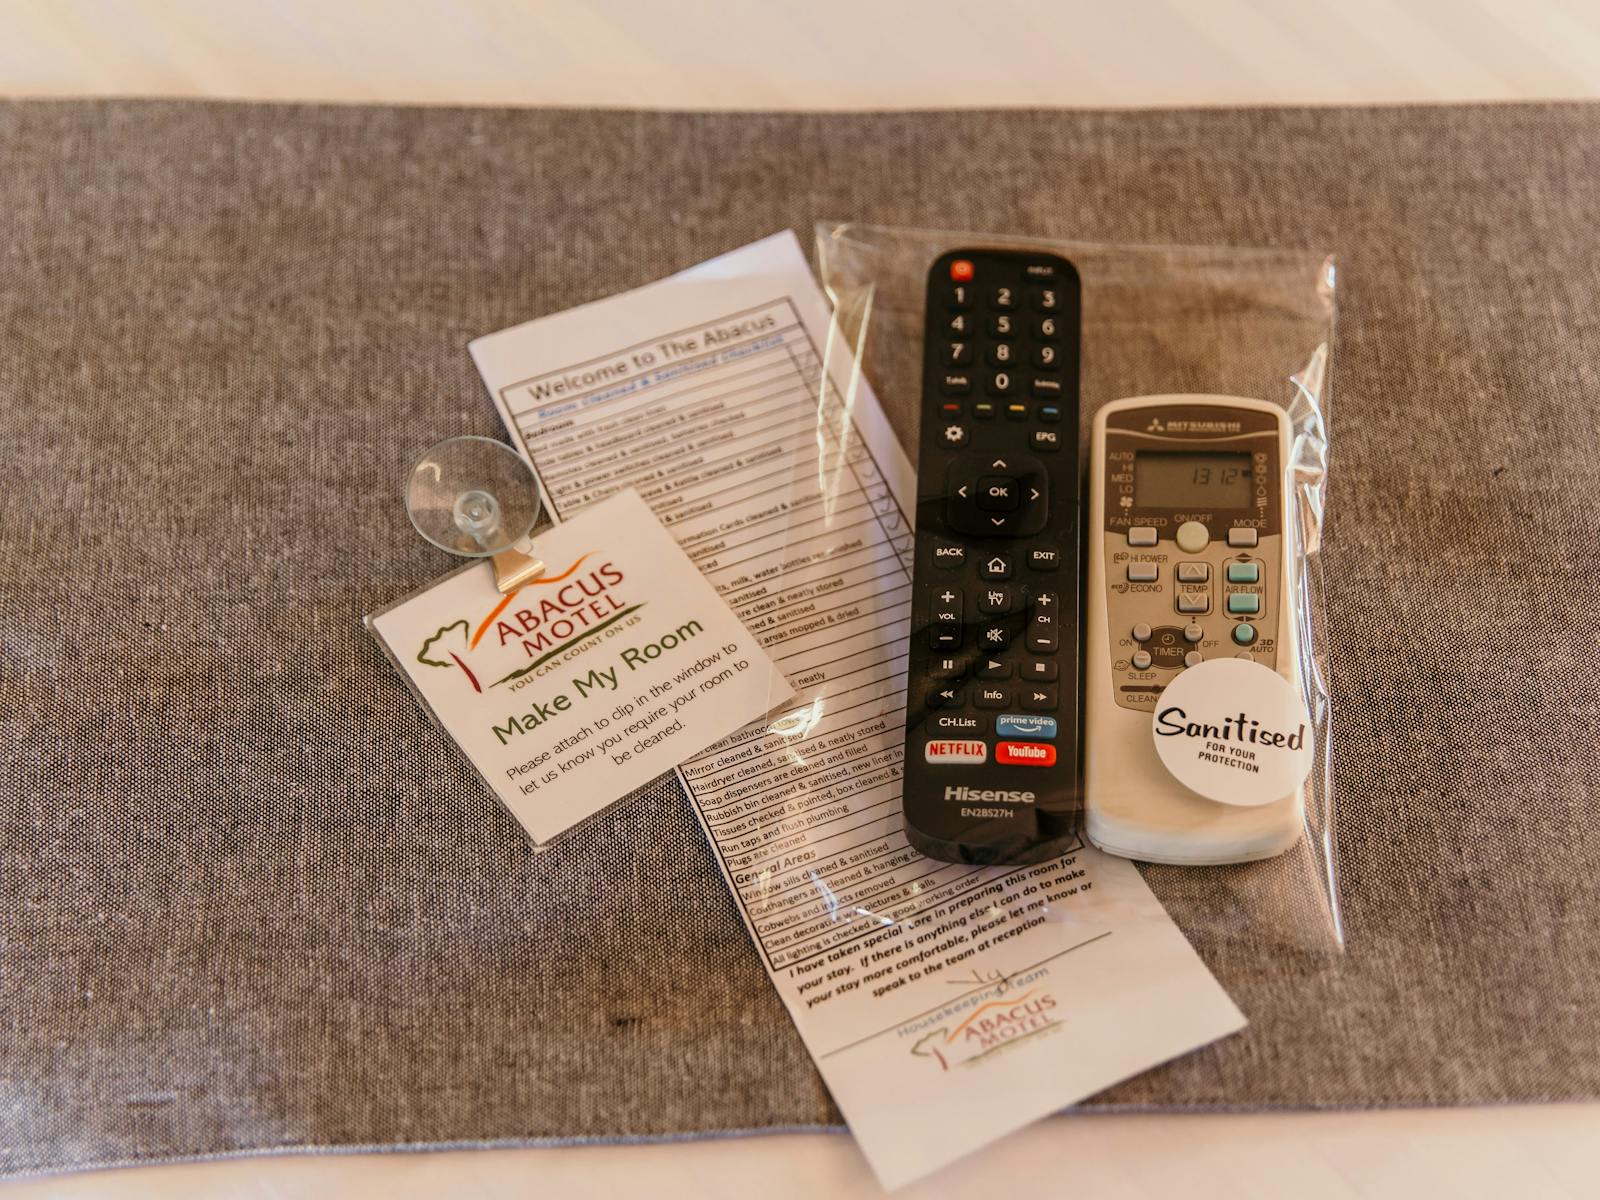 Sanitised and sealed remotes and motel information